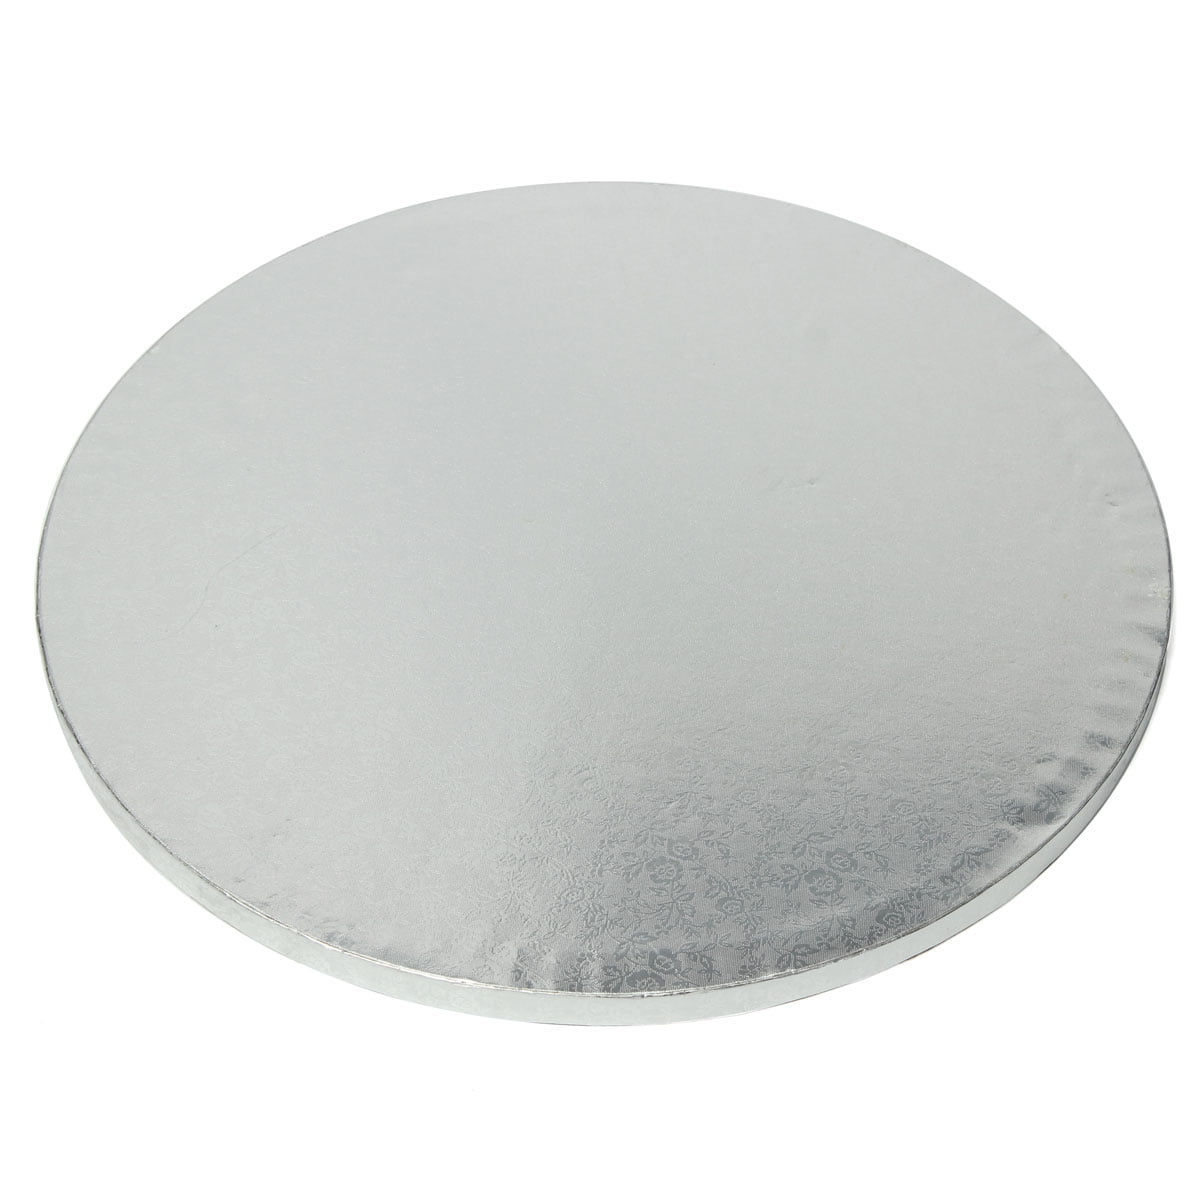 Cake Drum Boards 8 Inch Silver Round Baking Base for Home Parties Weddings Birthdays Cupcakes